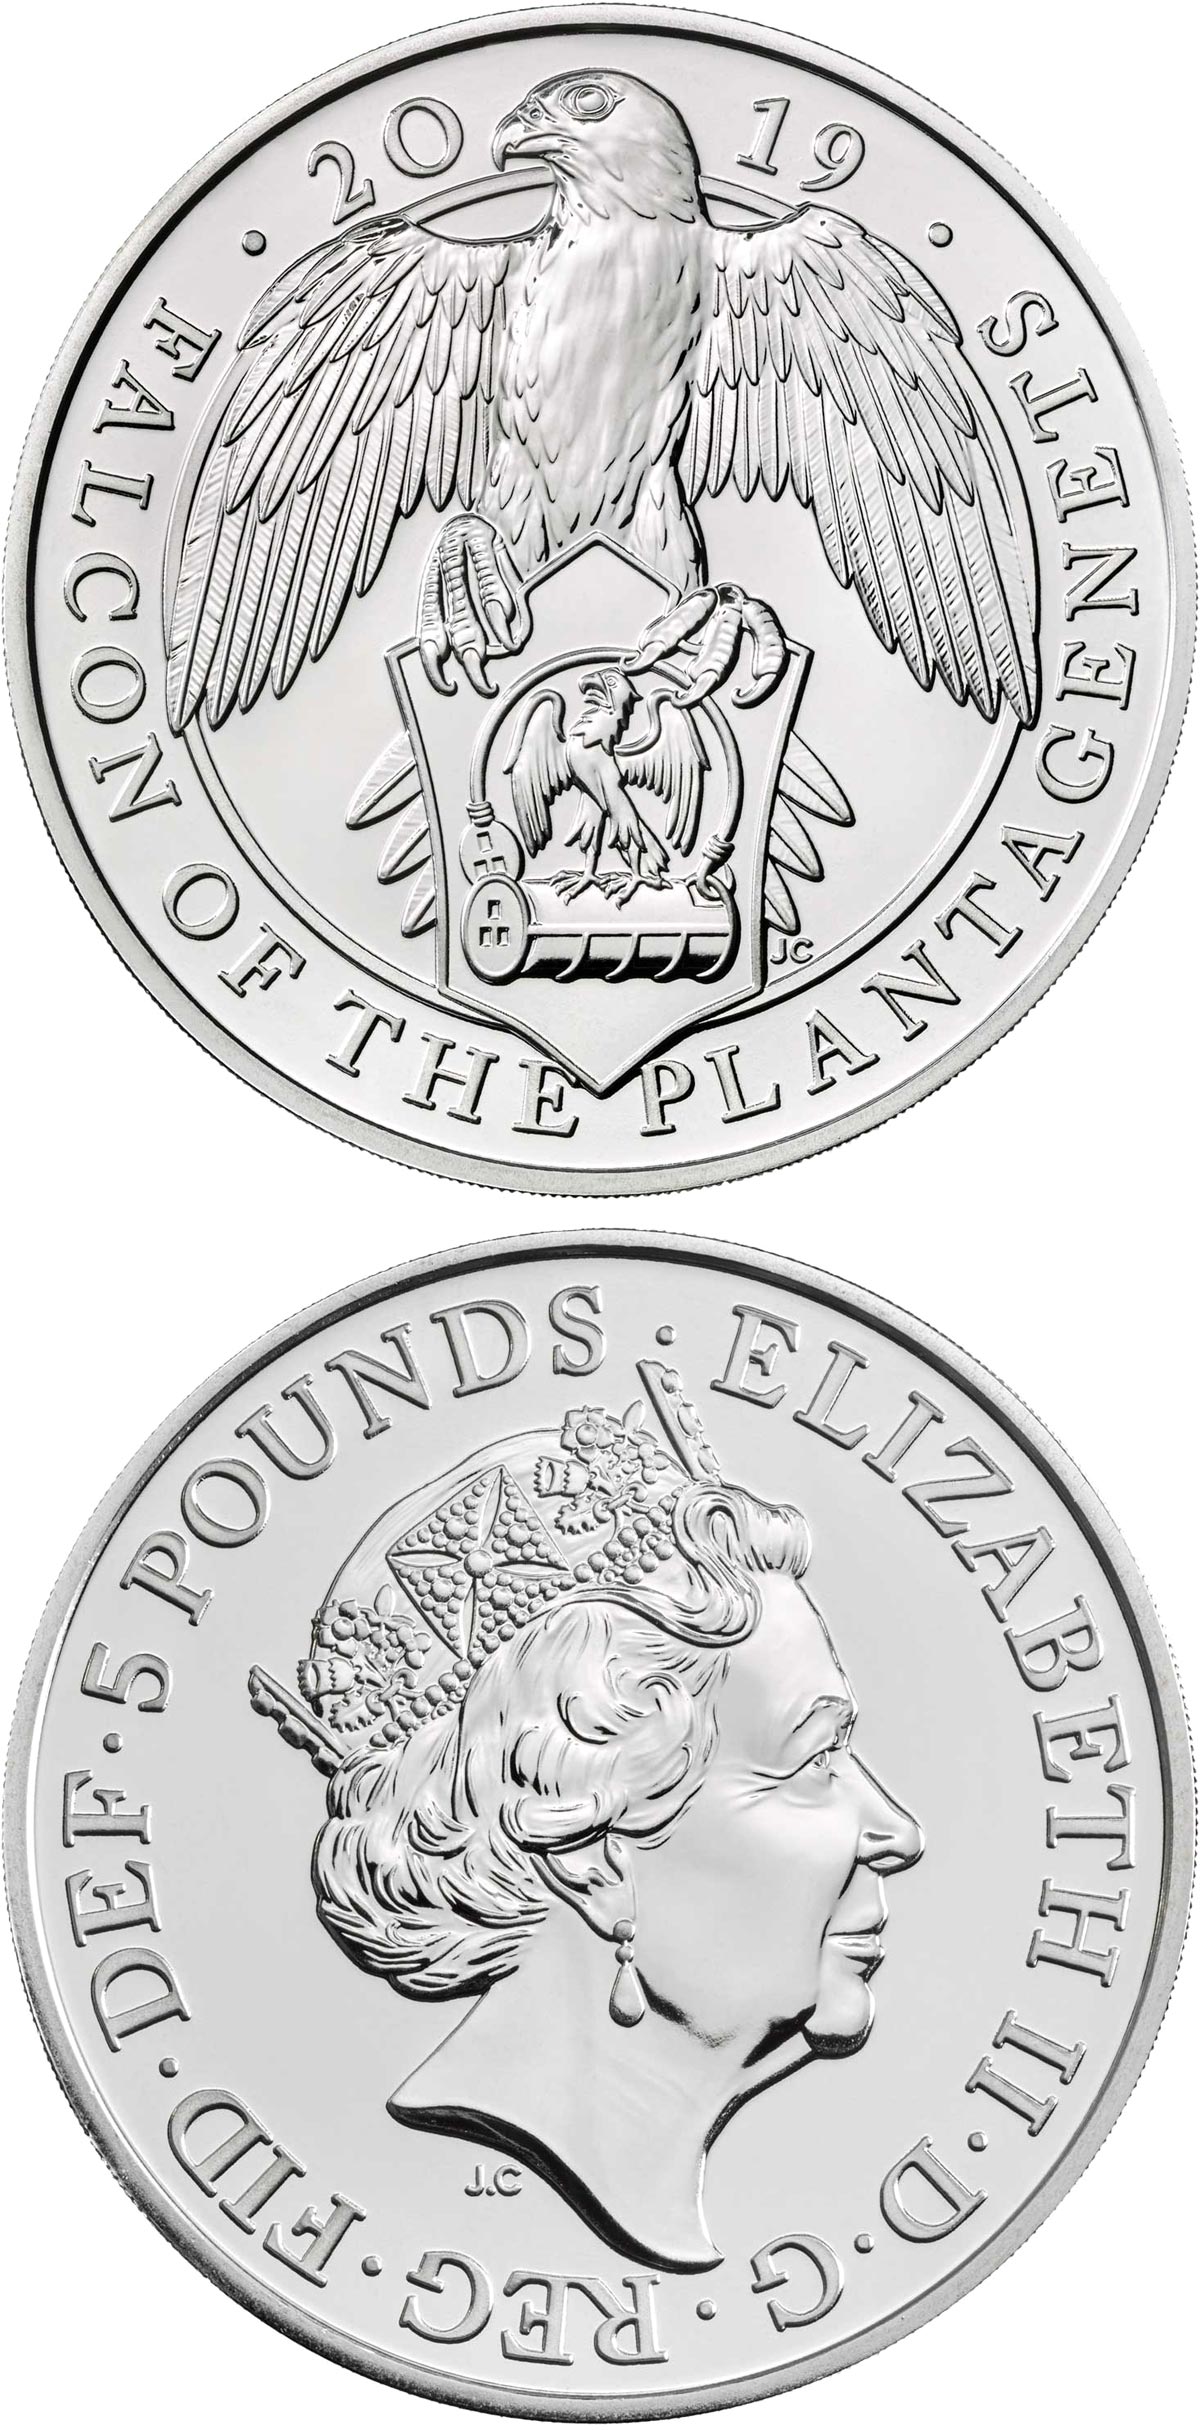 Image of 5 pounds coin - The Falcon of the Plantagenets | United Kingdom 2019.  The Copper–Nickel (CuNi) coin is of BU quality.